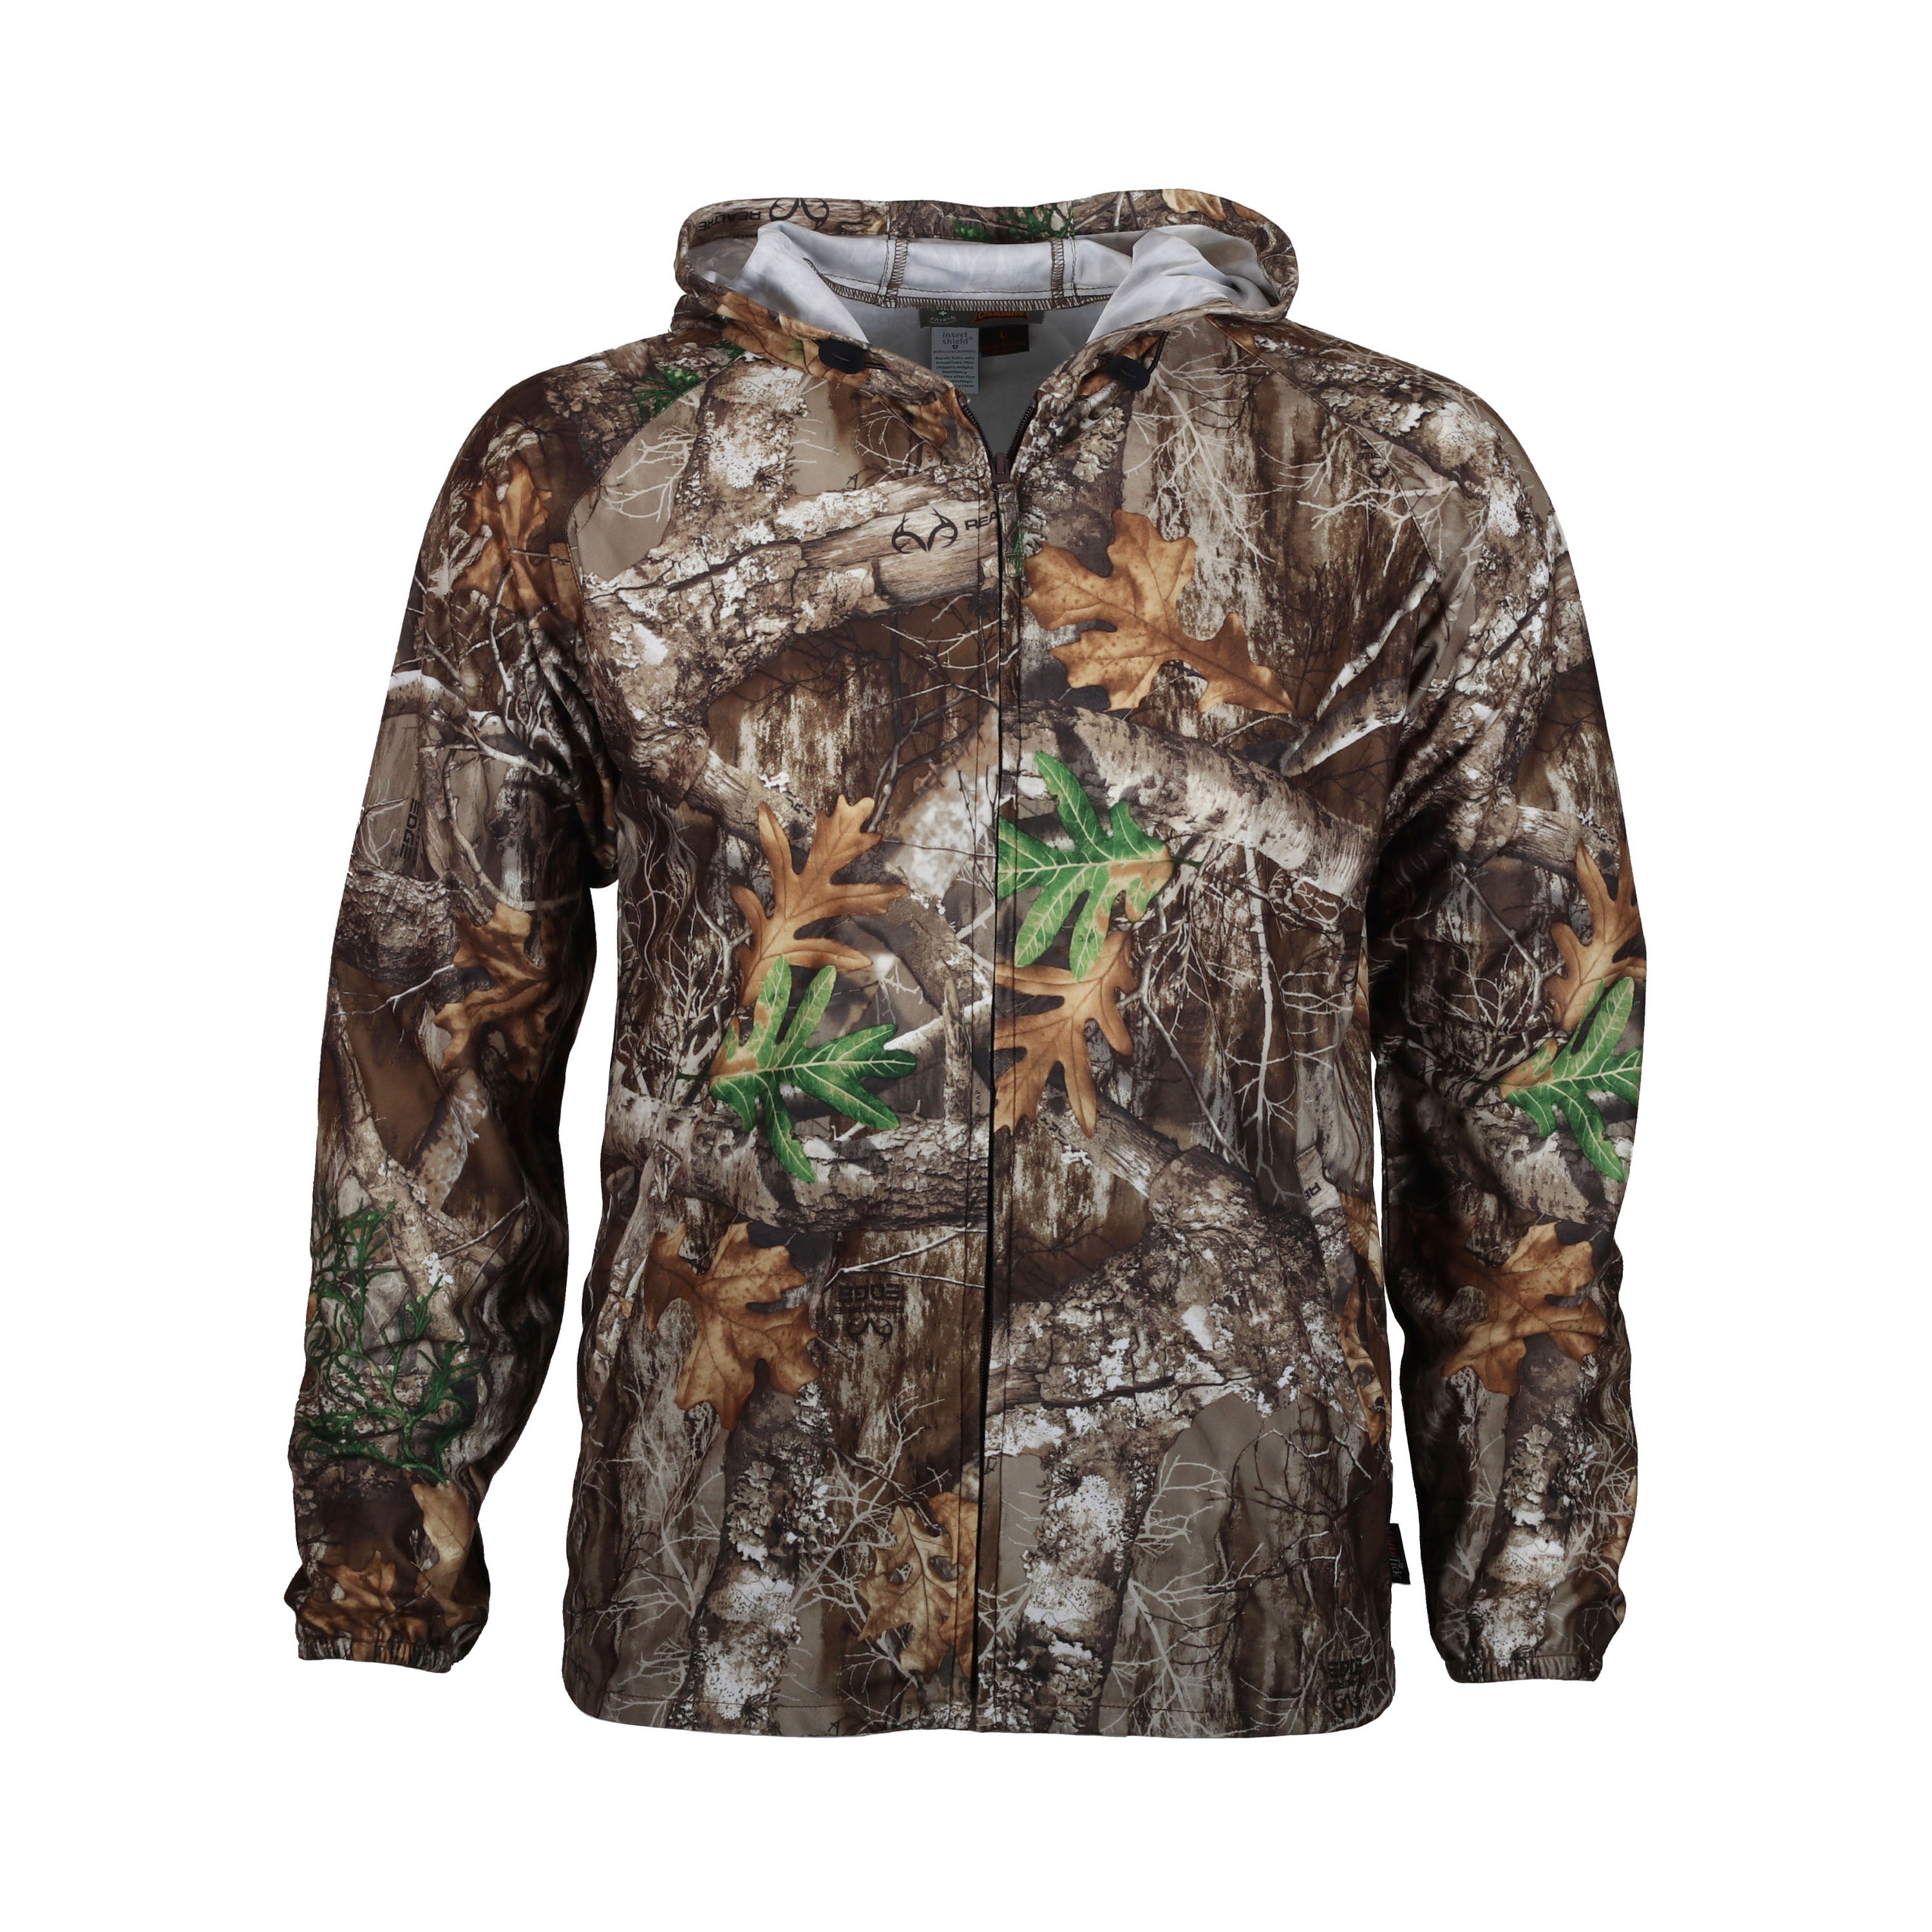 ElimiTick Insect Repellent Cover Up Jacket